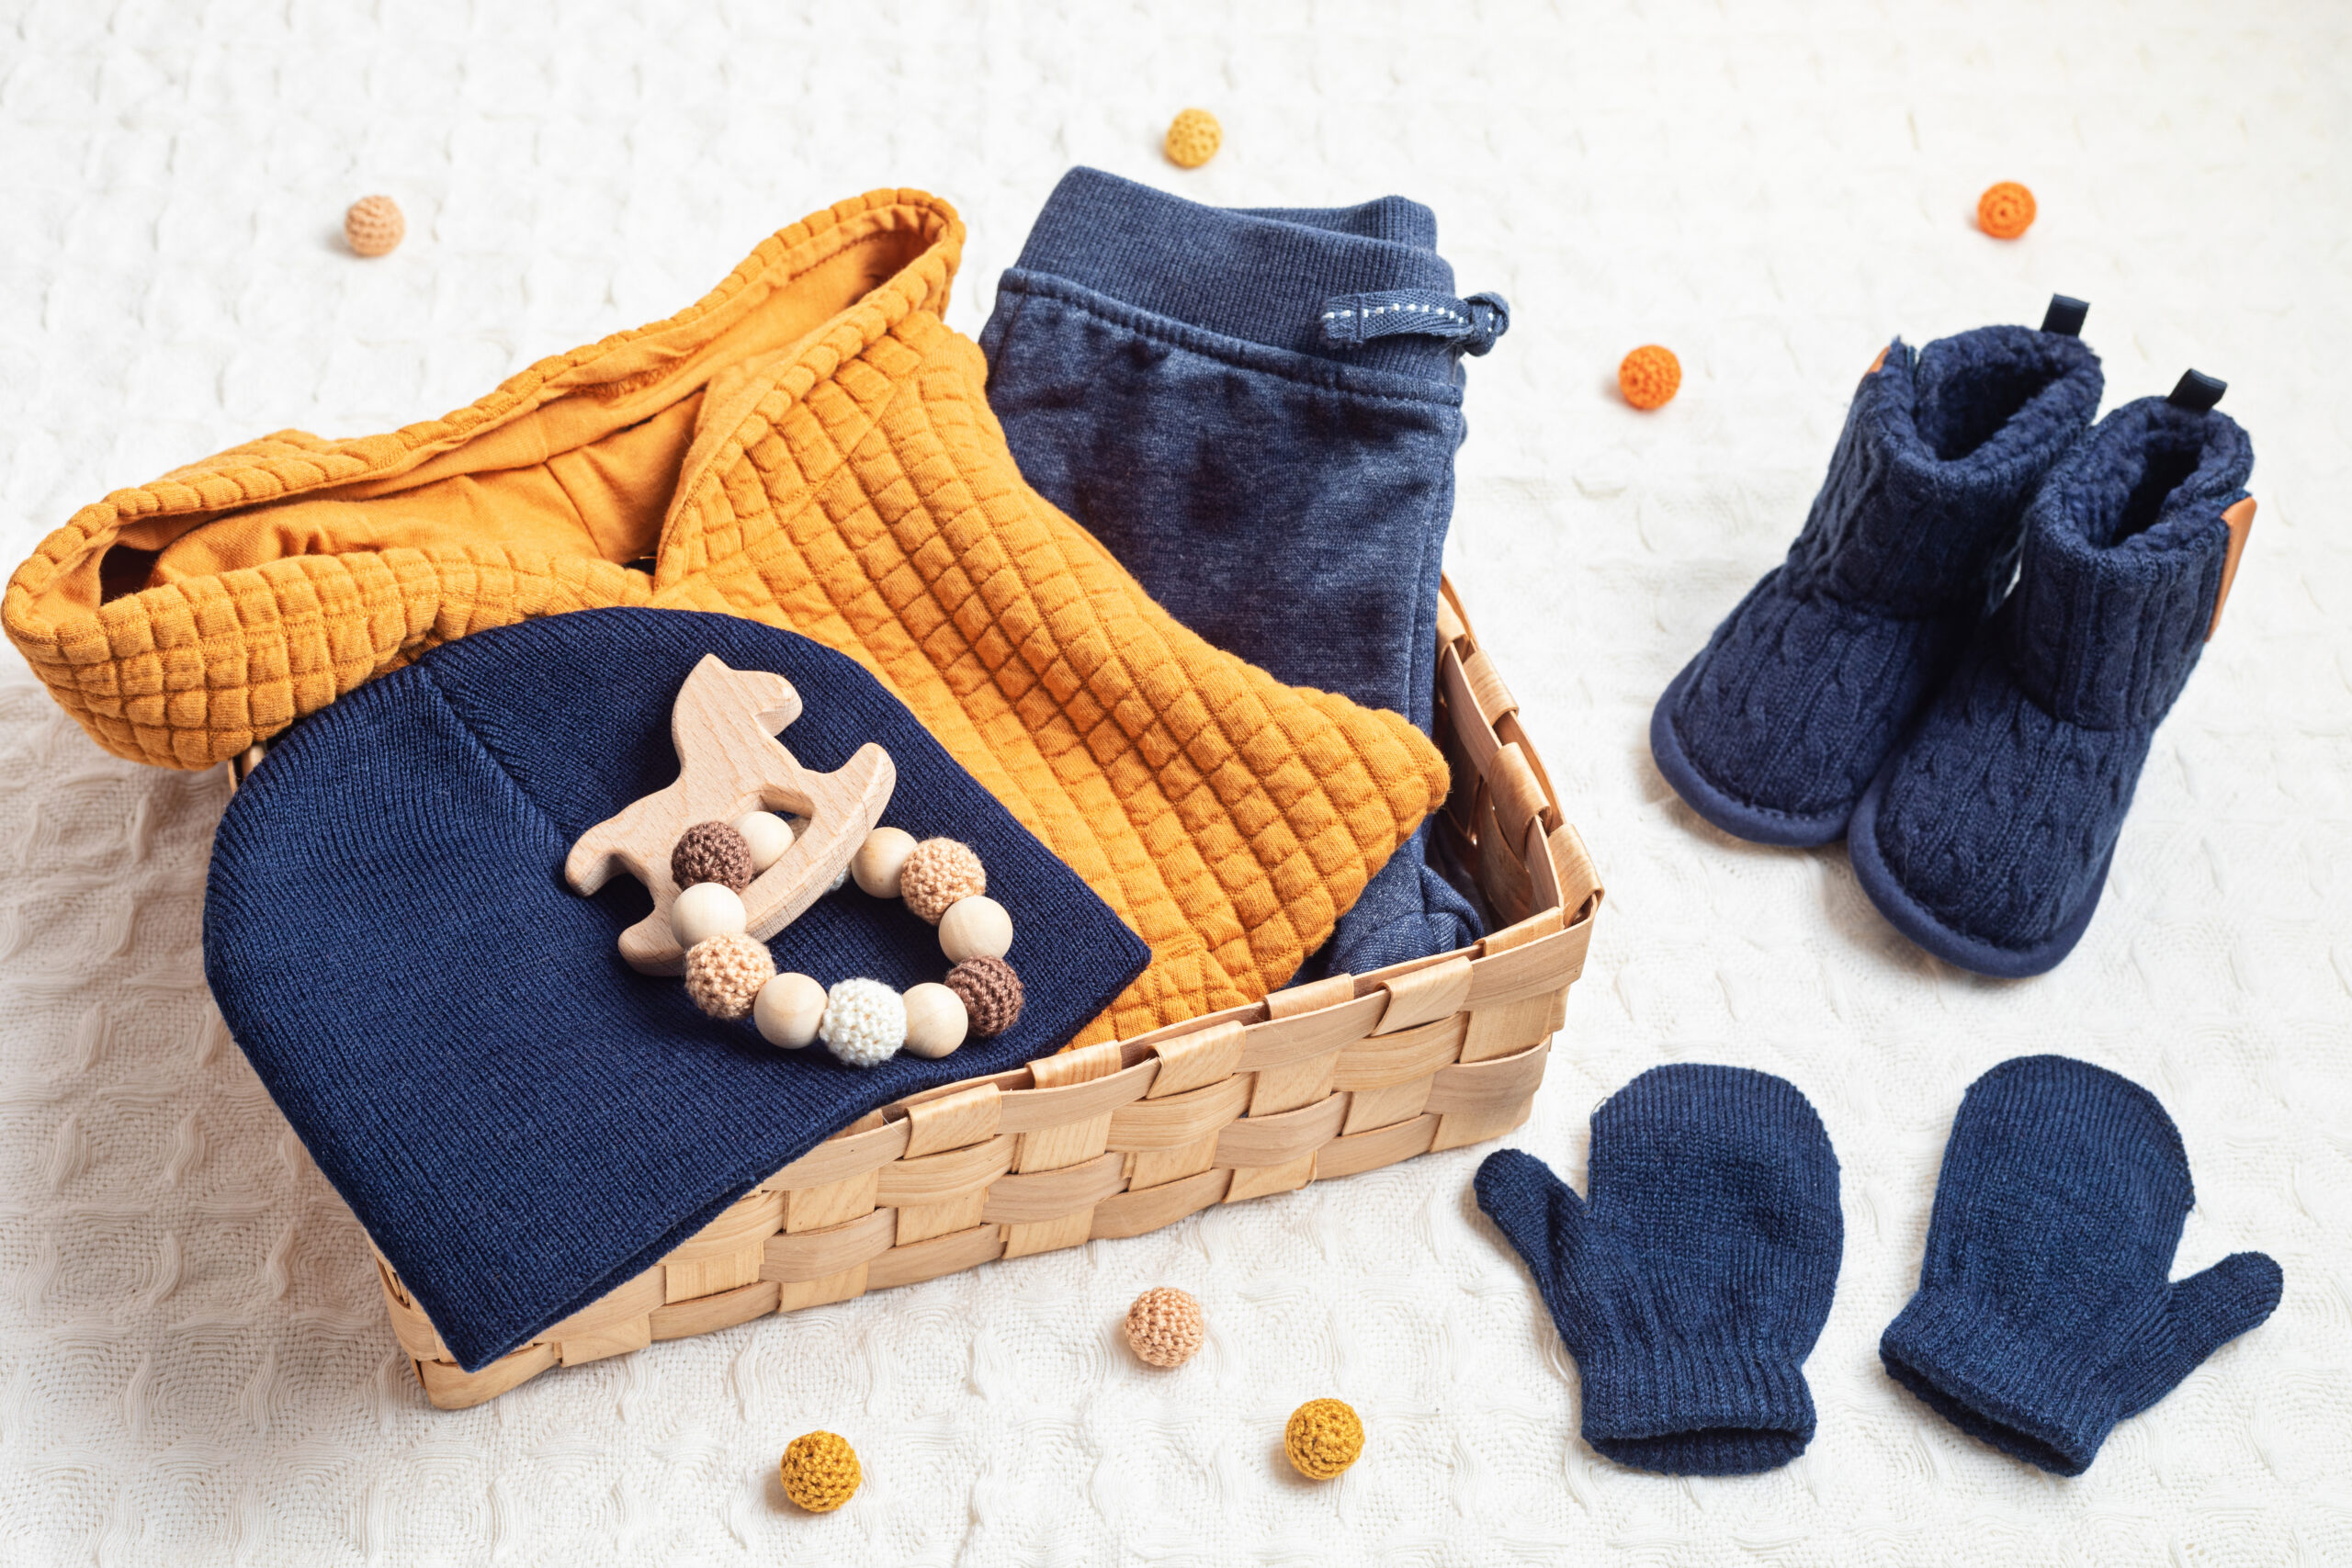 Set of cute organic baby clothes, toys and booties. Heartwarming present for cold weather. Newborn gifts for Christmas and baby shower, care package, donation idea.